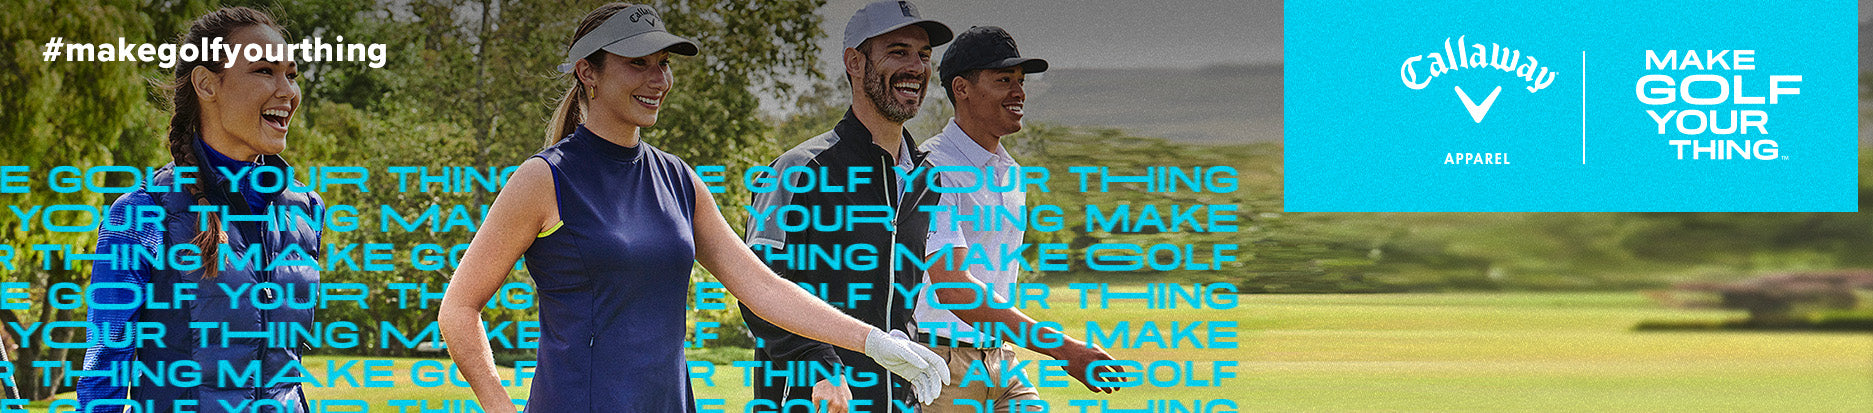 Make Golf Your Thing